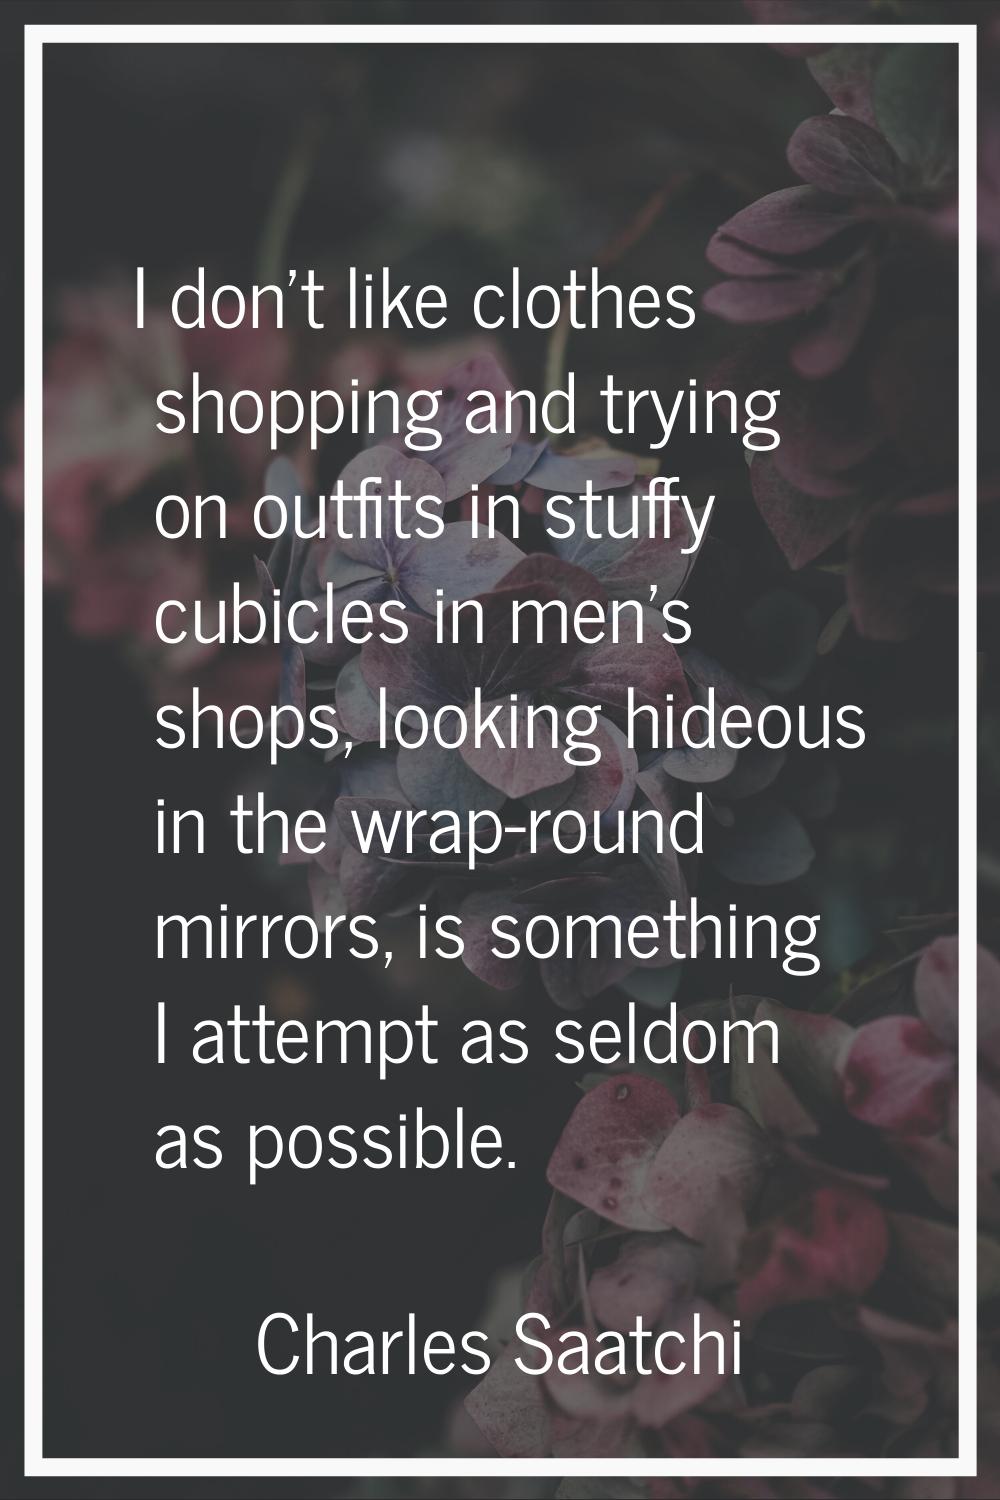 I don't like clothes shopping and trying on outfits in stuffy cubicles in men's shops, looking hide